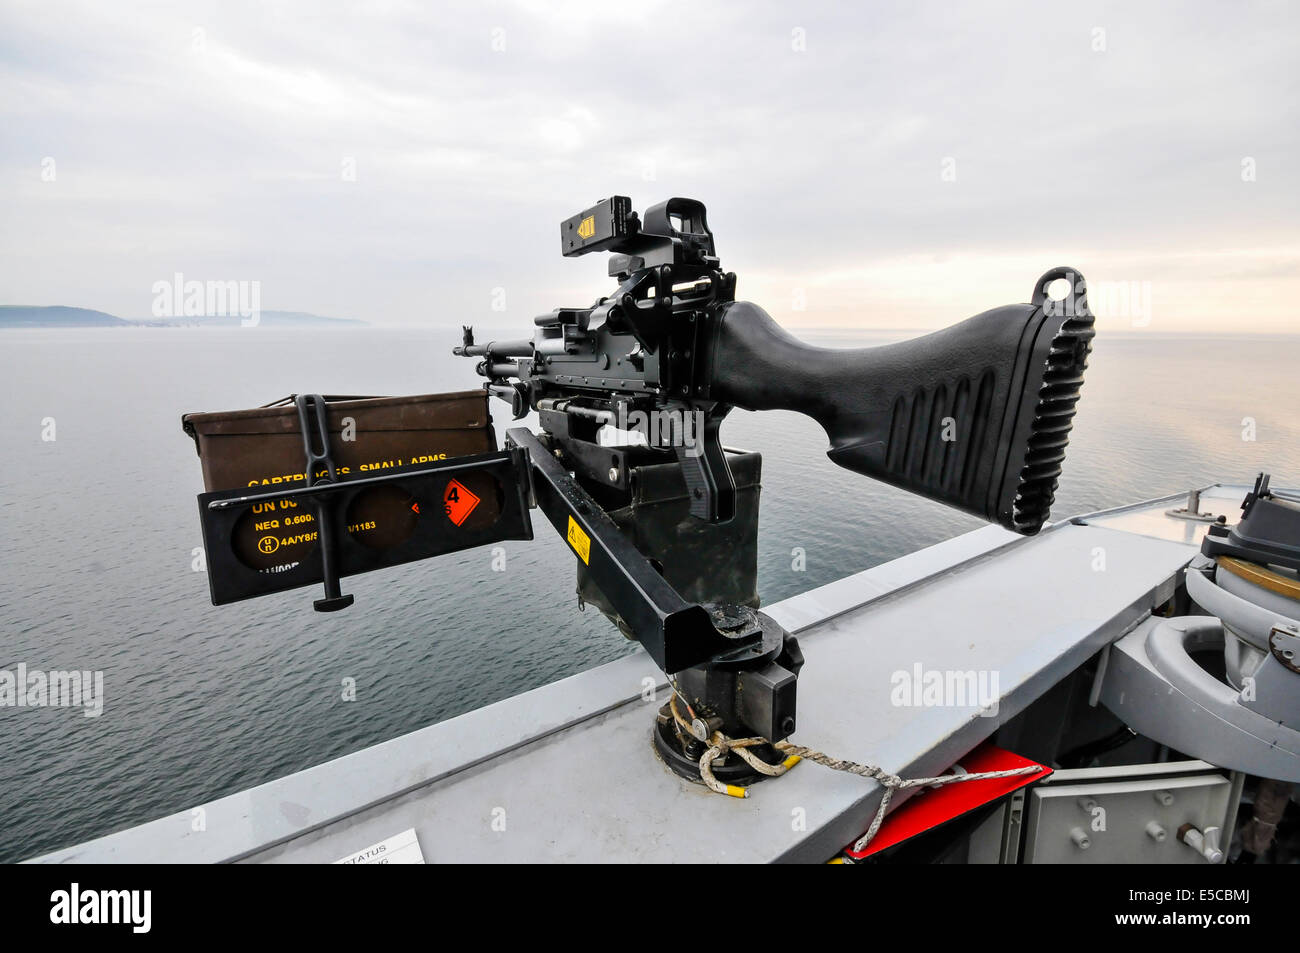 Belfast, Northern Ireland. 26/07/2014 - General Purpose Machine Gun (GPMG) with box of ammunition, mounted on the Royal Navy Type 45 destroyer HMS Duncan Credit:  Stephen Barnes/Alamy Live News Stock Photo